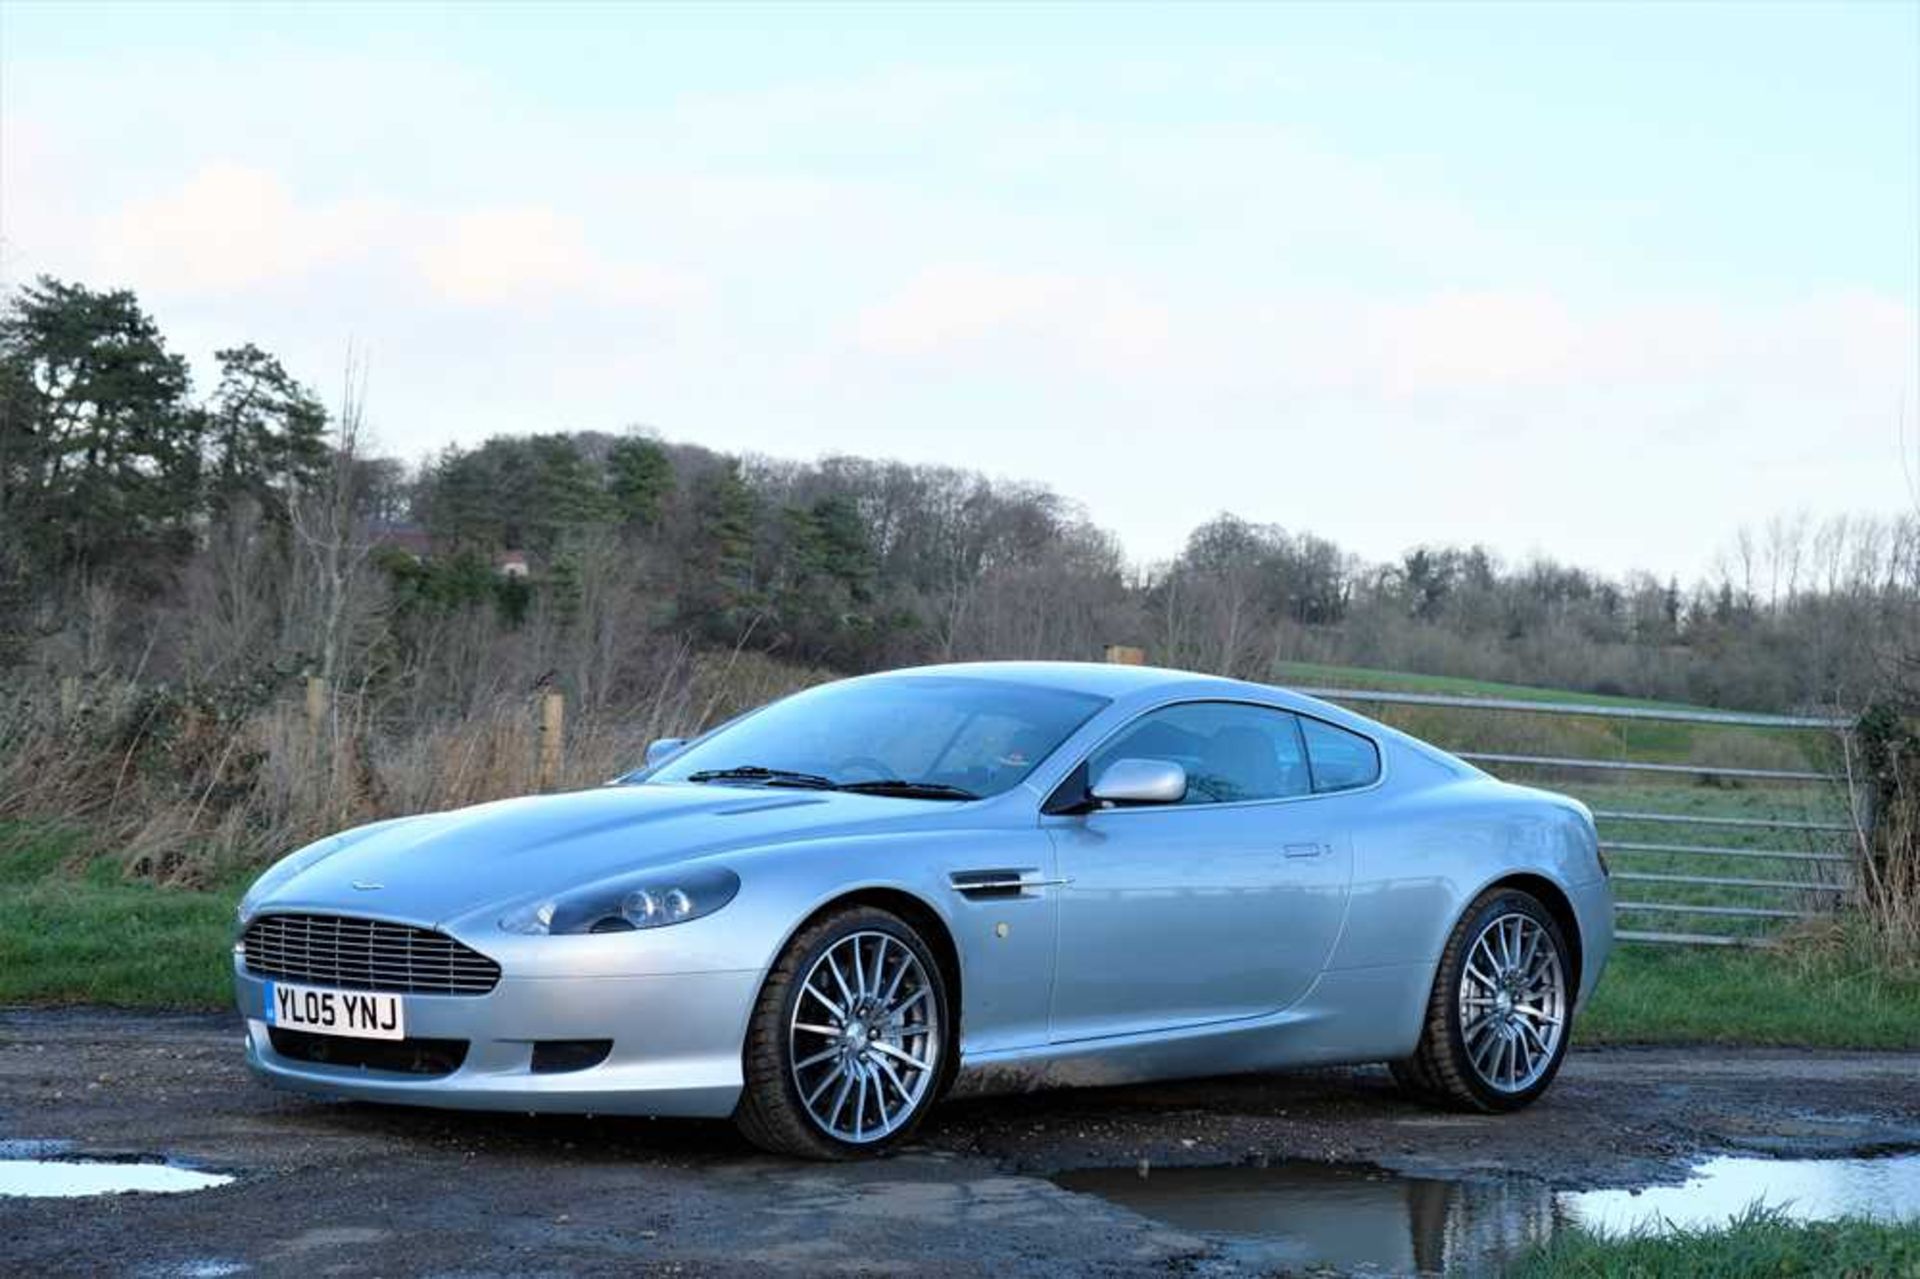 2005 Aston Martin DB9 c.25,000 from new and 4 former keepers - Image 13 of 59